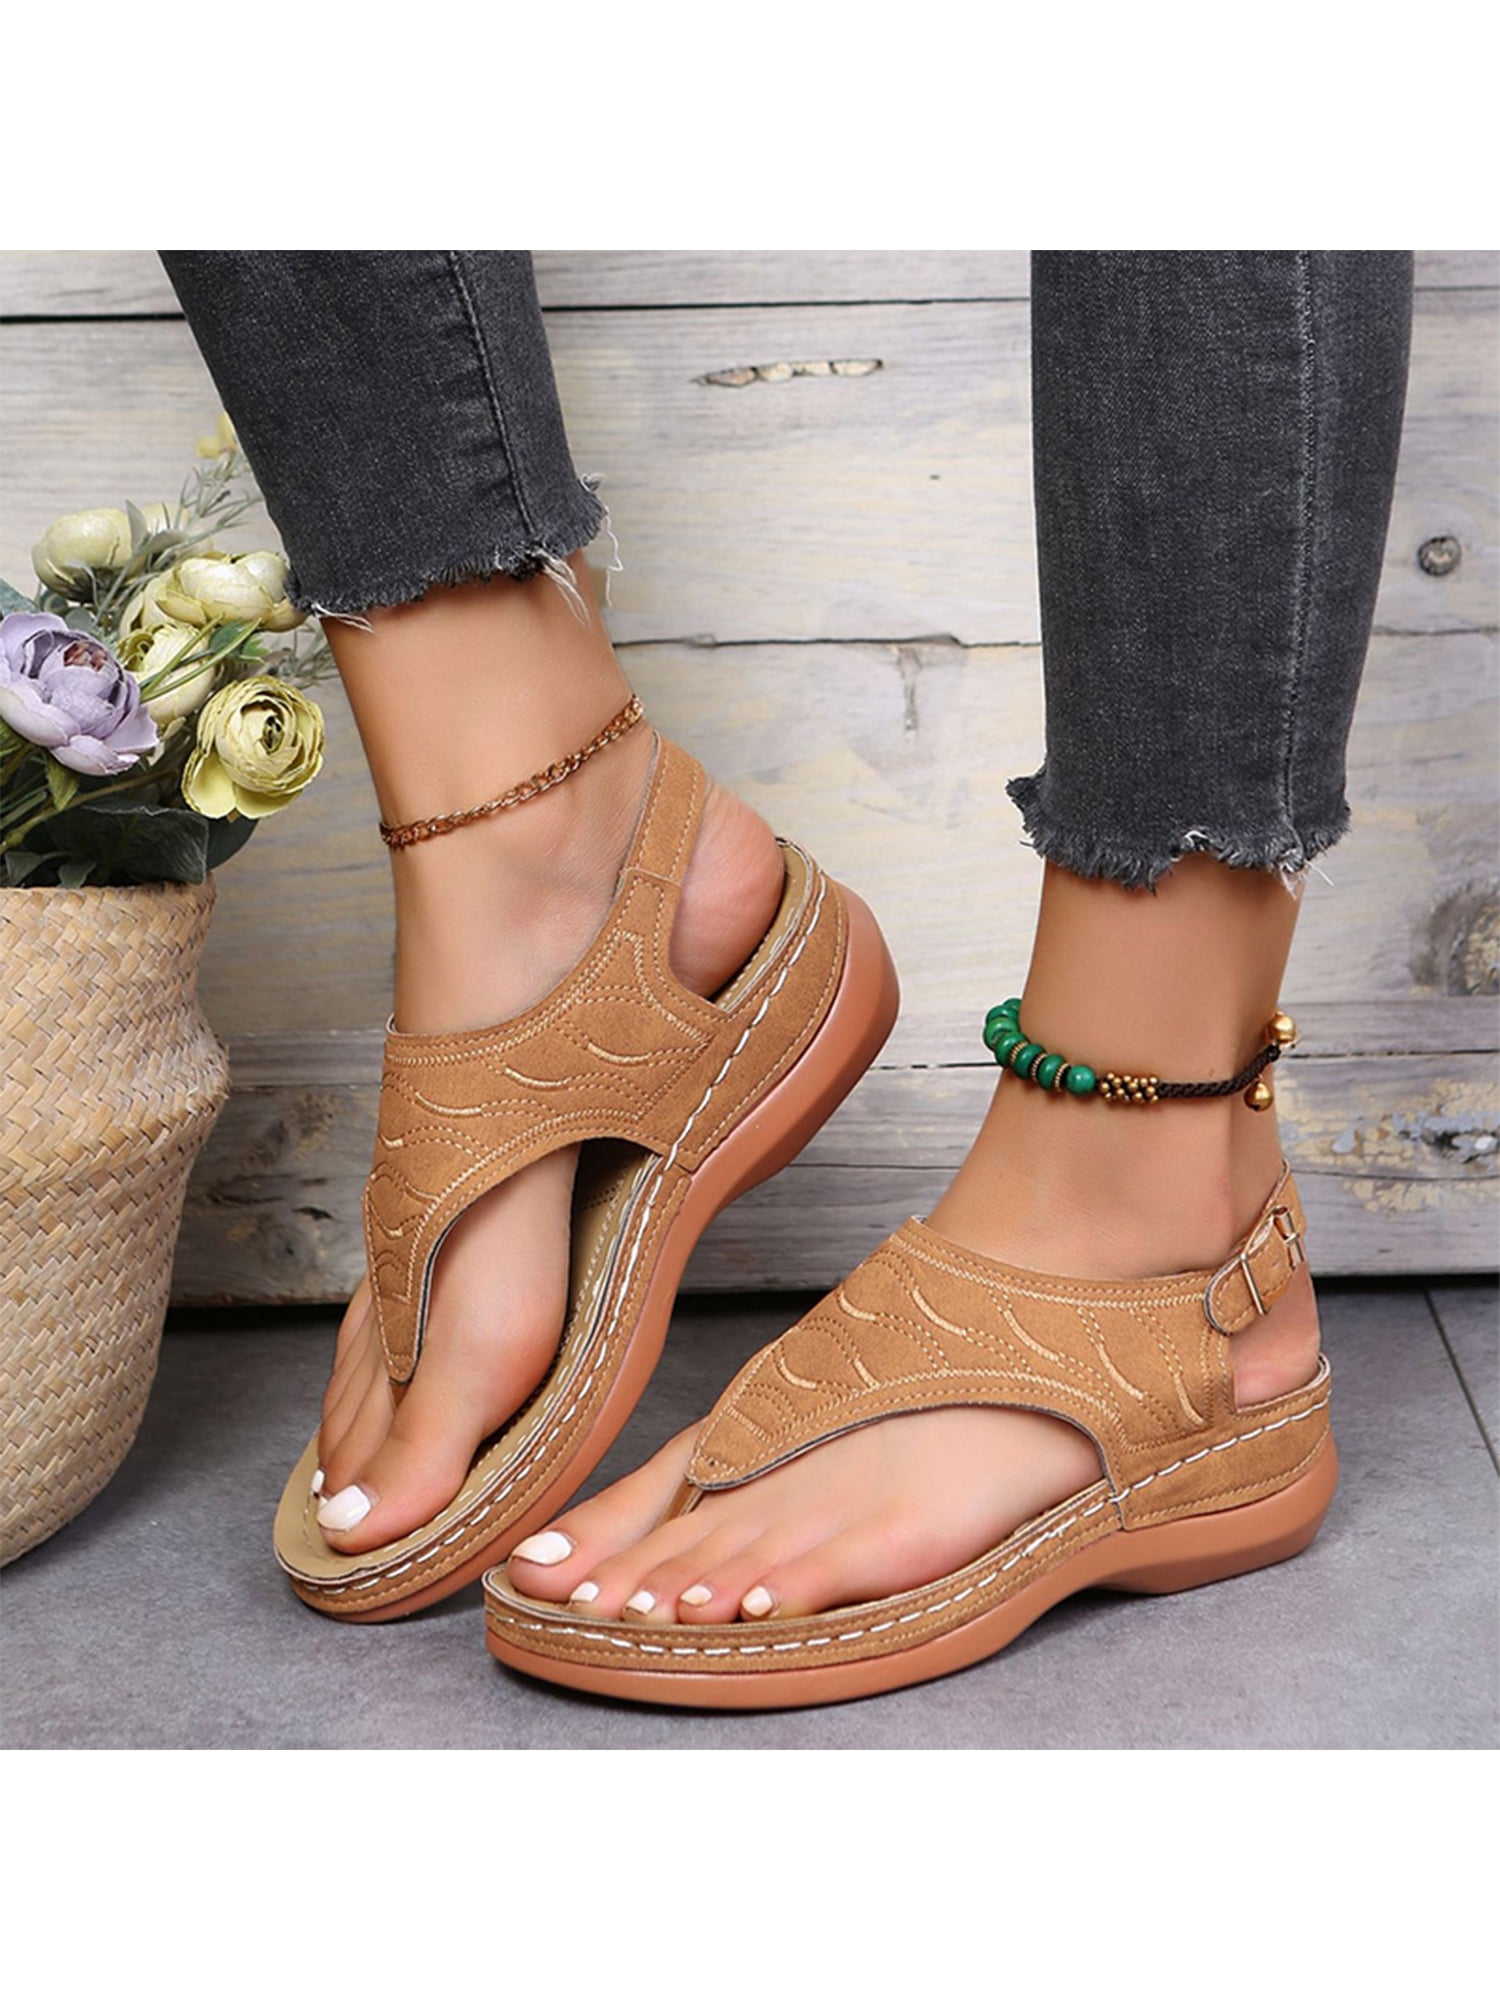 Zodanni Lady Flip Flop Roman Style Shoes Wedge Sandals Work Thong Sandal  Daily Soft Open Toe Brown 8.5 